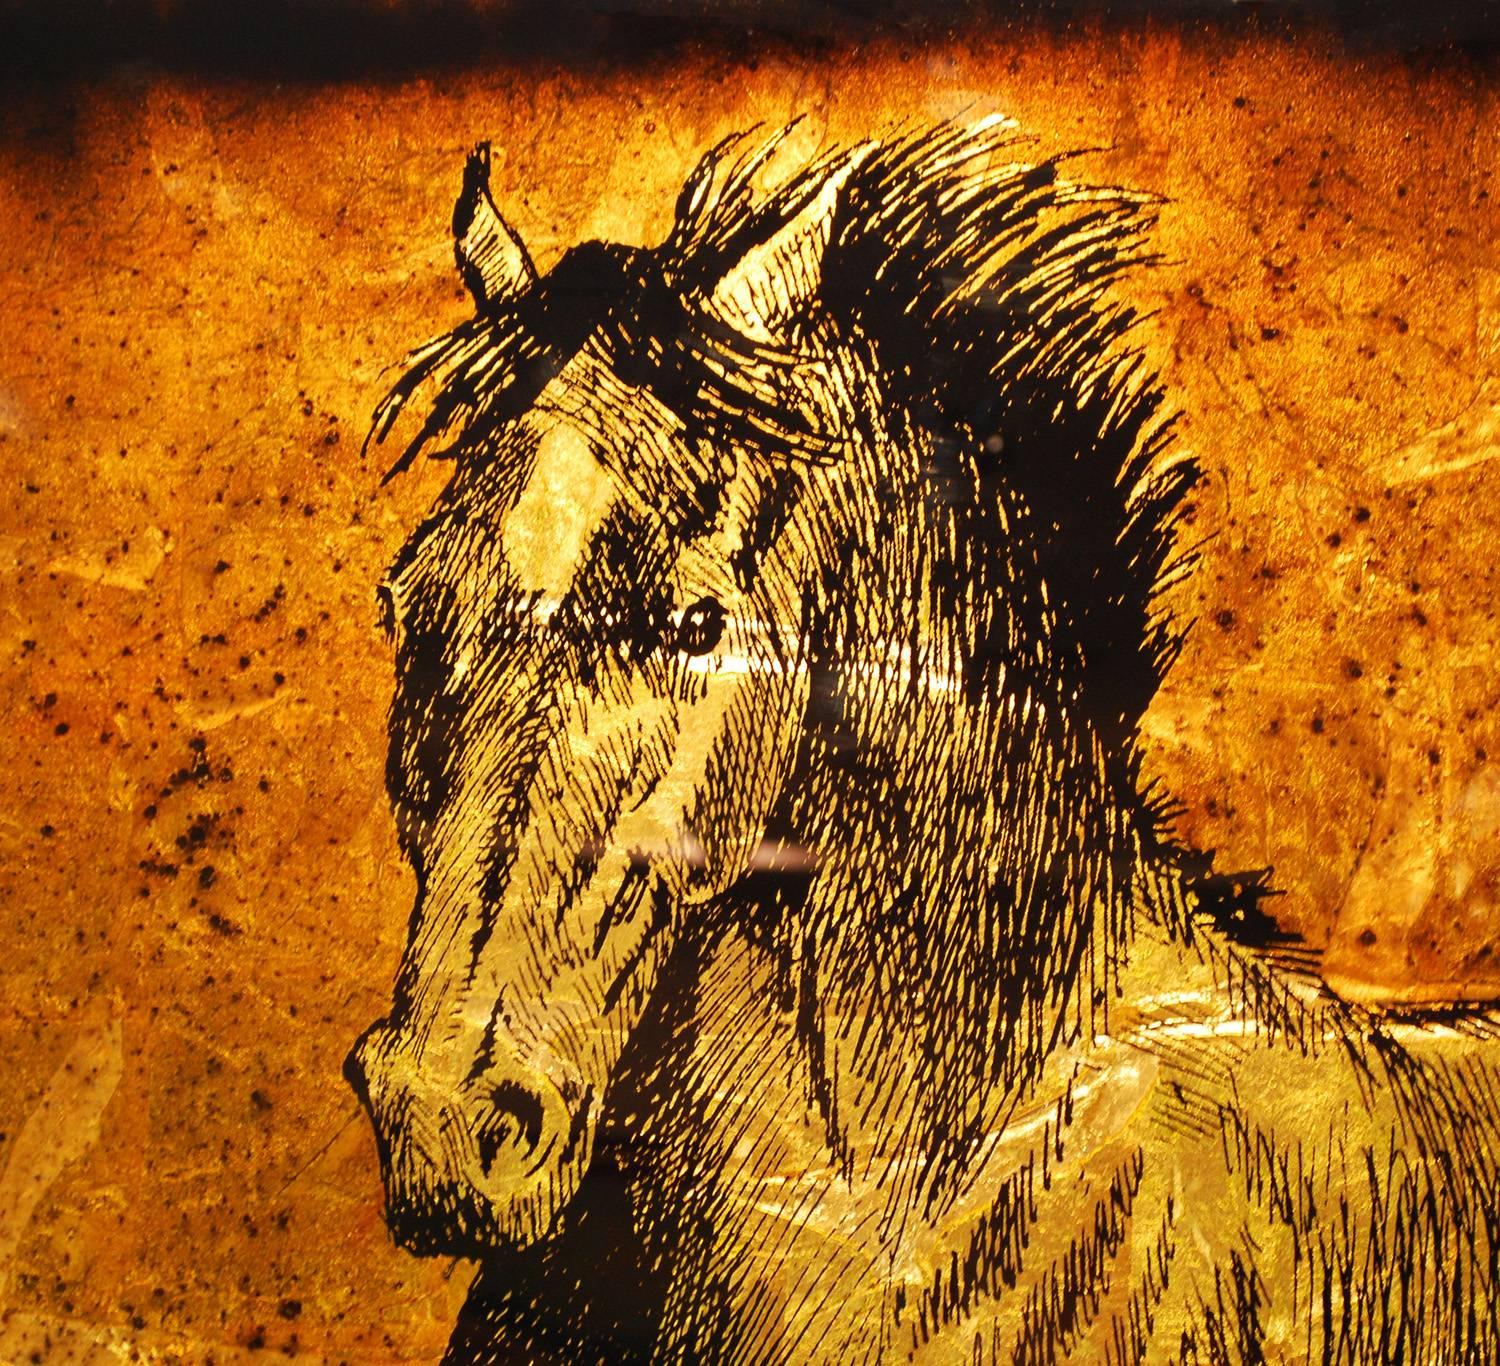 A brilliant and substantial reverse glass and gold leaf painting of a horse by respected artist Jack White. 

Gold and silver leaf is affixed on the back and creates phenomenal glow, color and texture throughout the piece.

Jack White was an